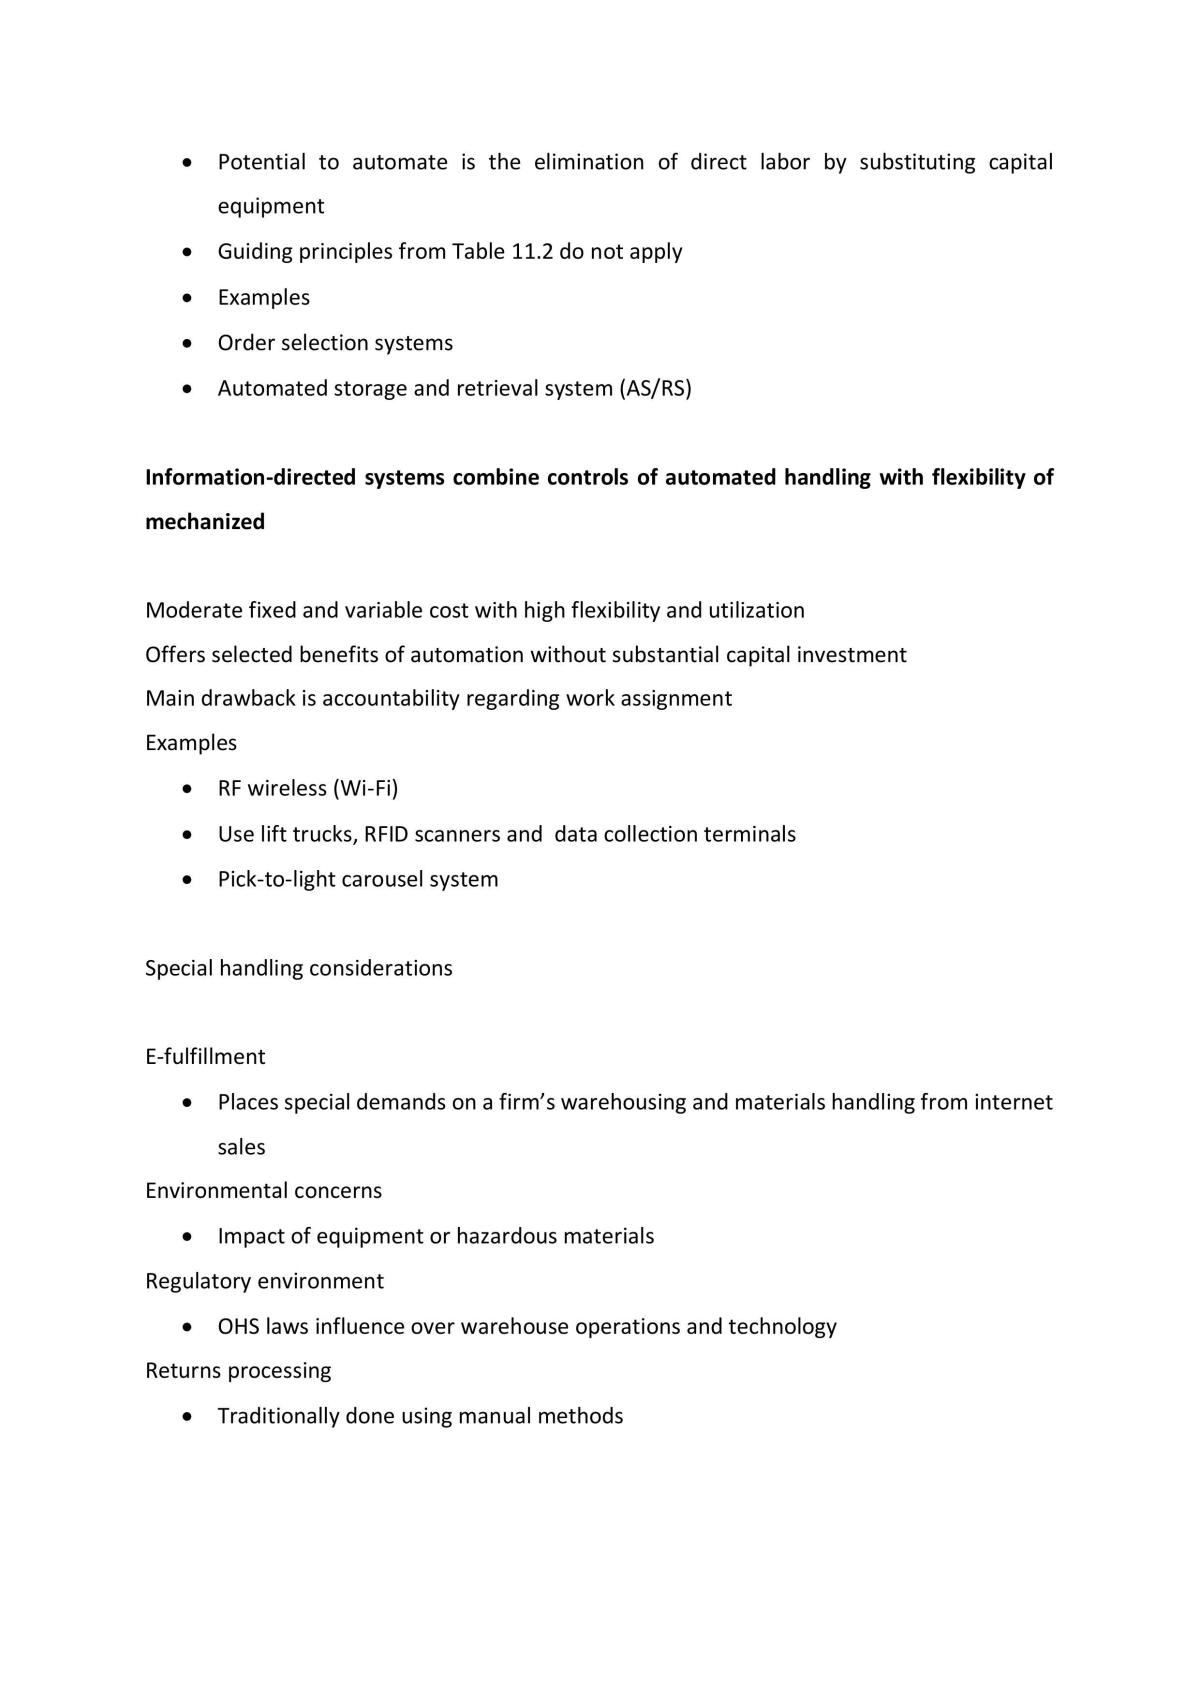 Lean Manufacturing complete study notes - Page 11